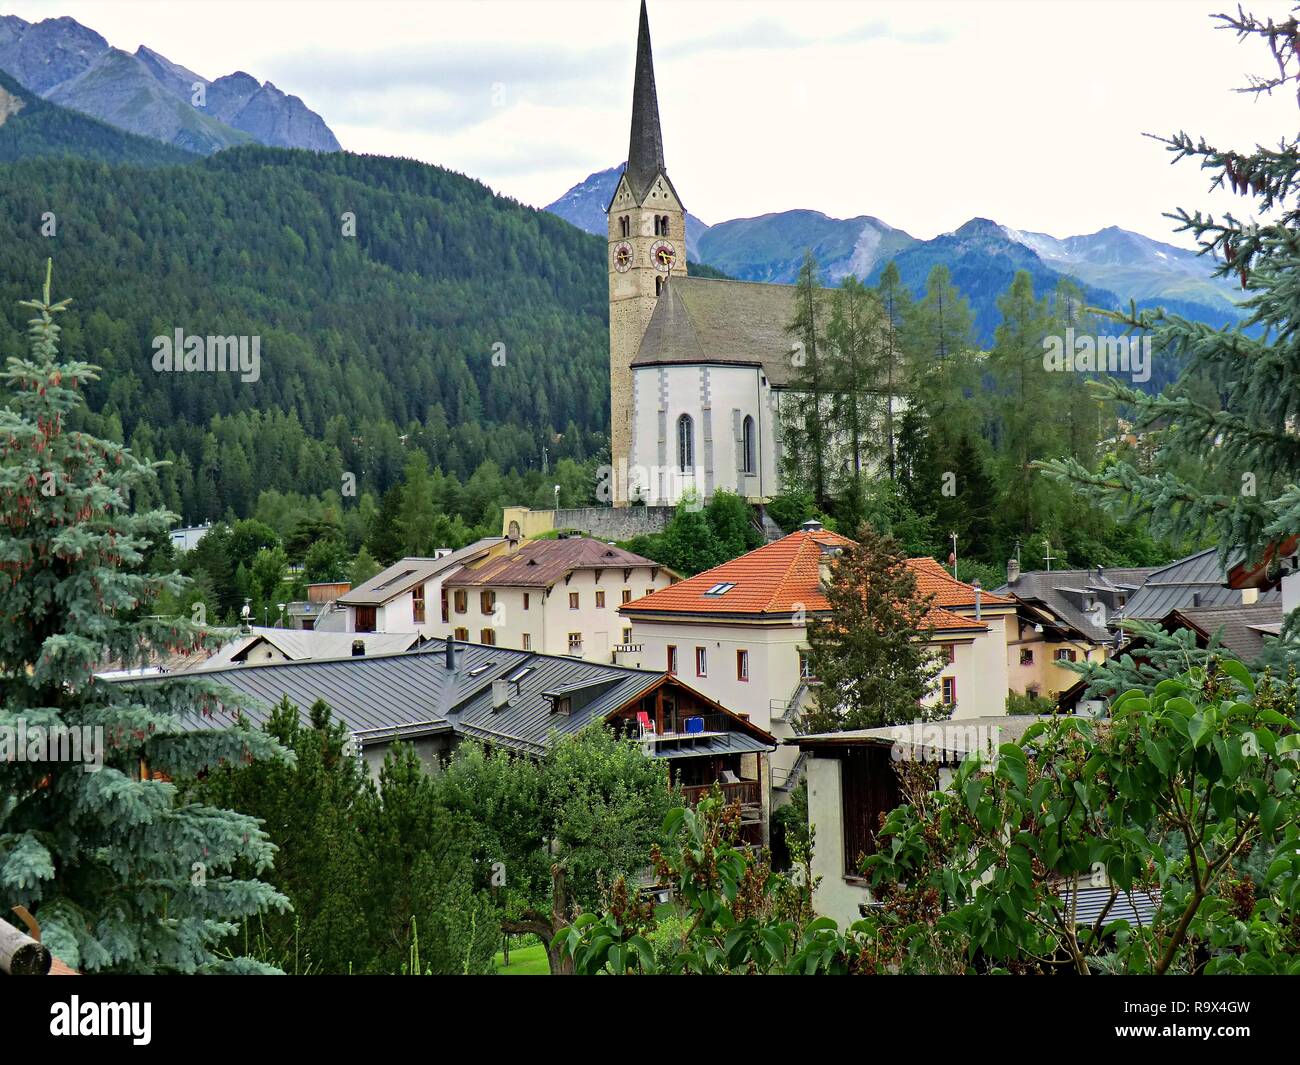 View of the prominent church above the town of Scuol surrounded by mountain scenery in the Lower Engadine, Switzerland Stock Photo